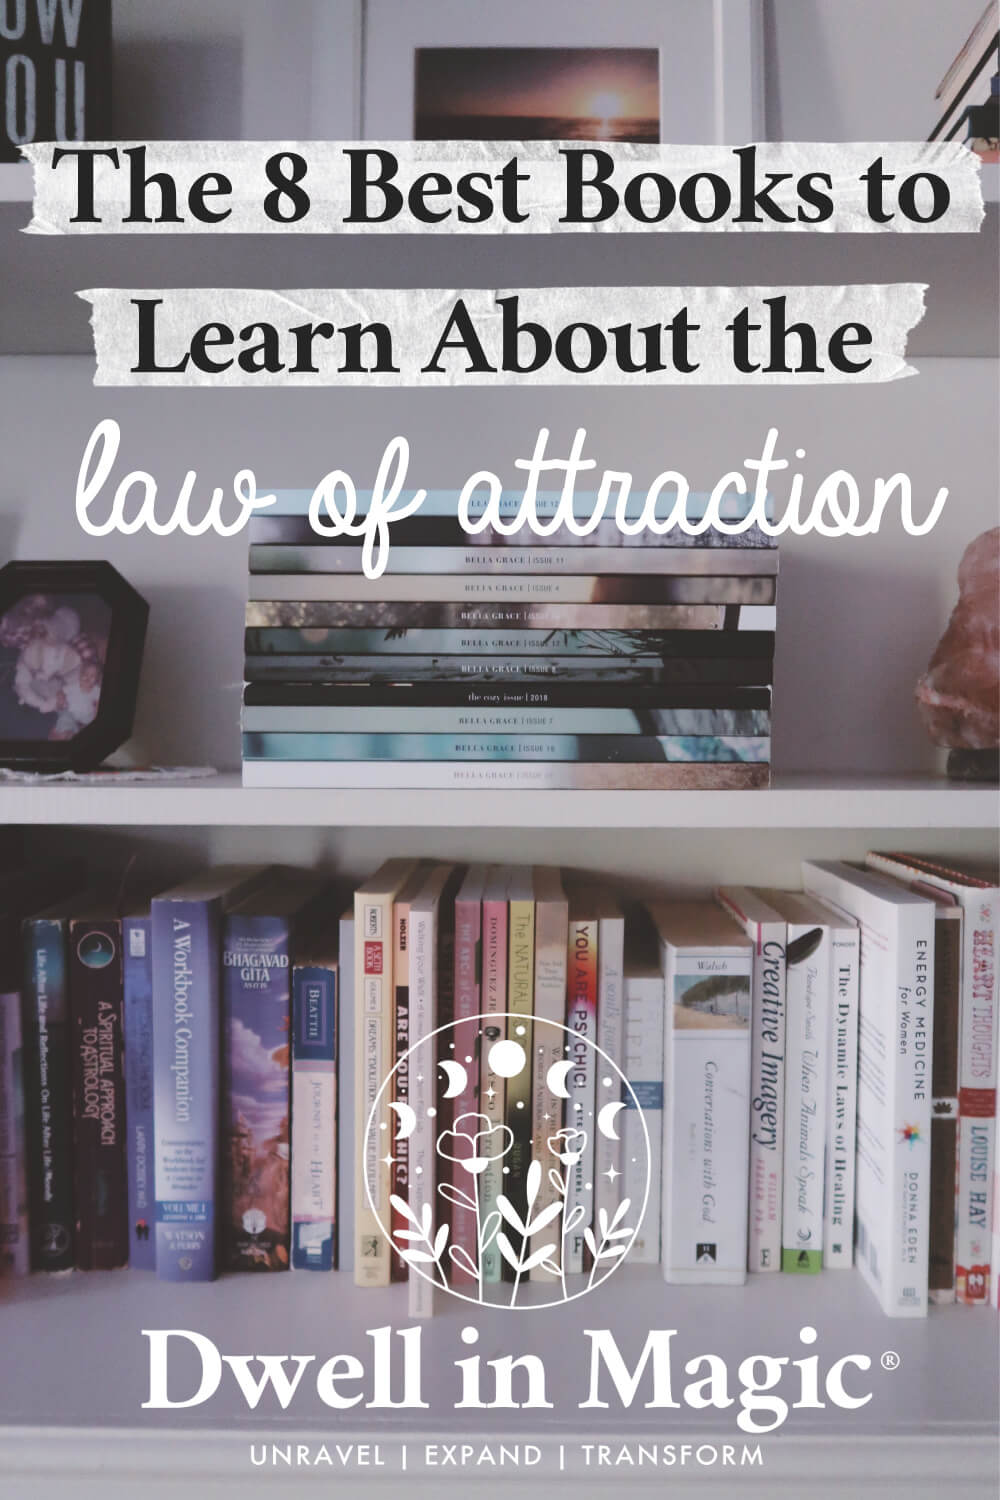 A list of my favorite law of attraction books that have changed my life and taught me how to manifest.